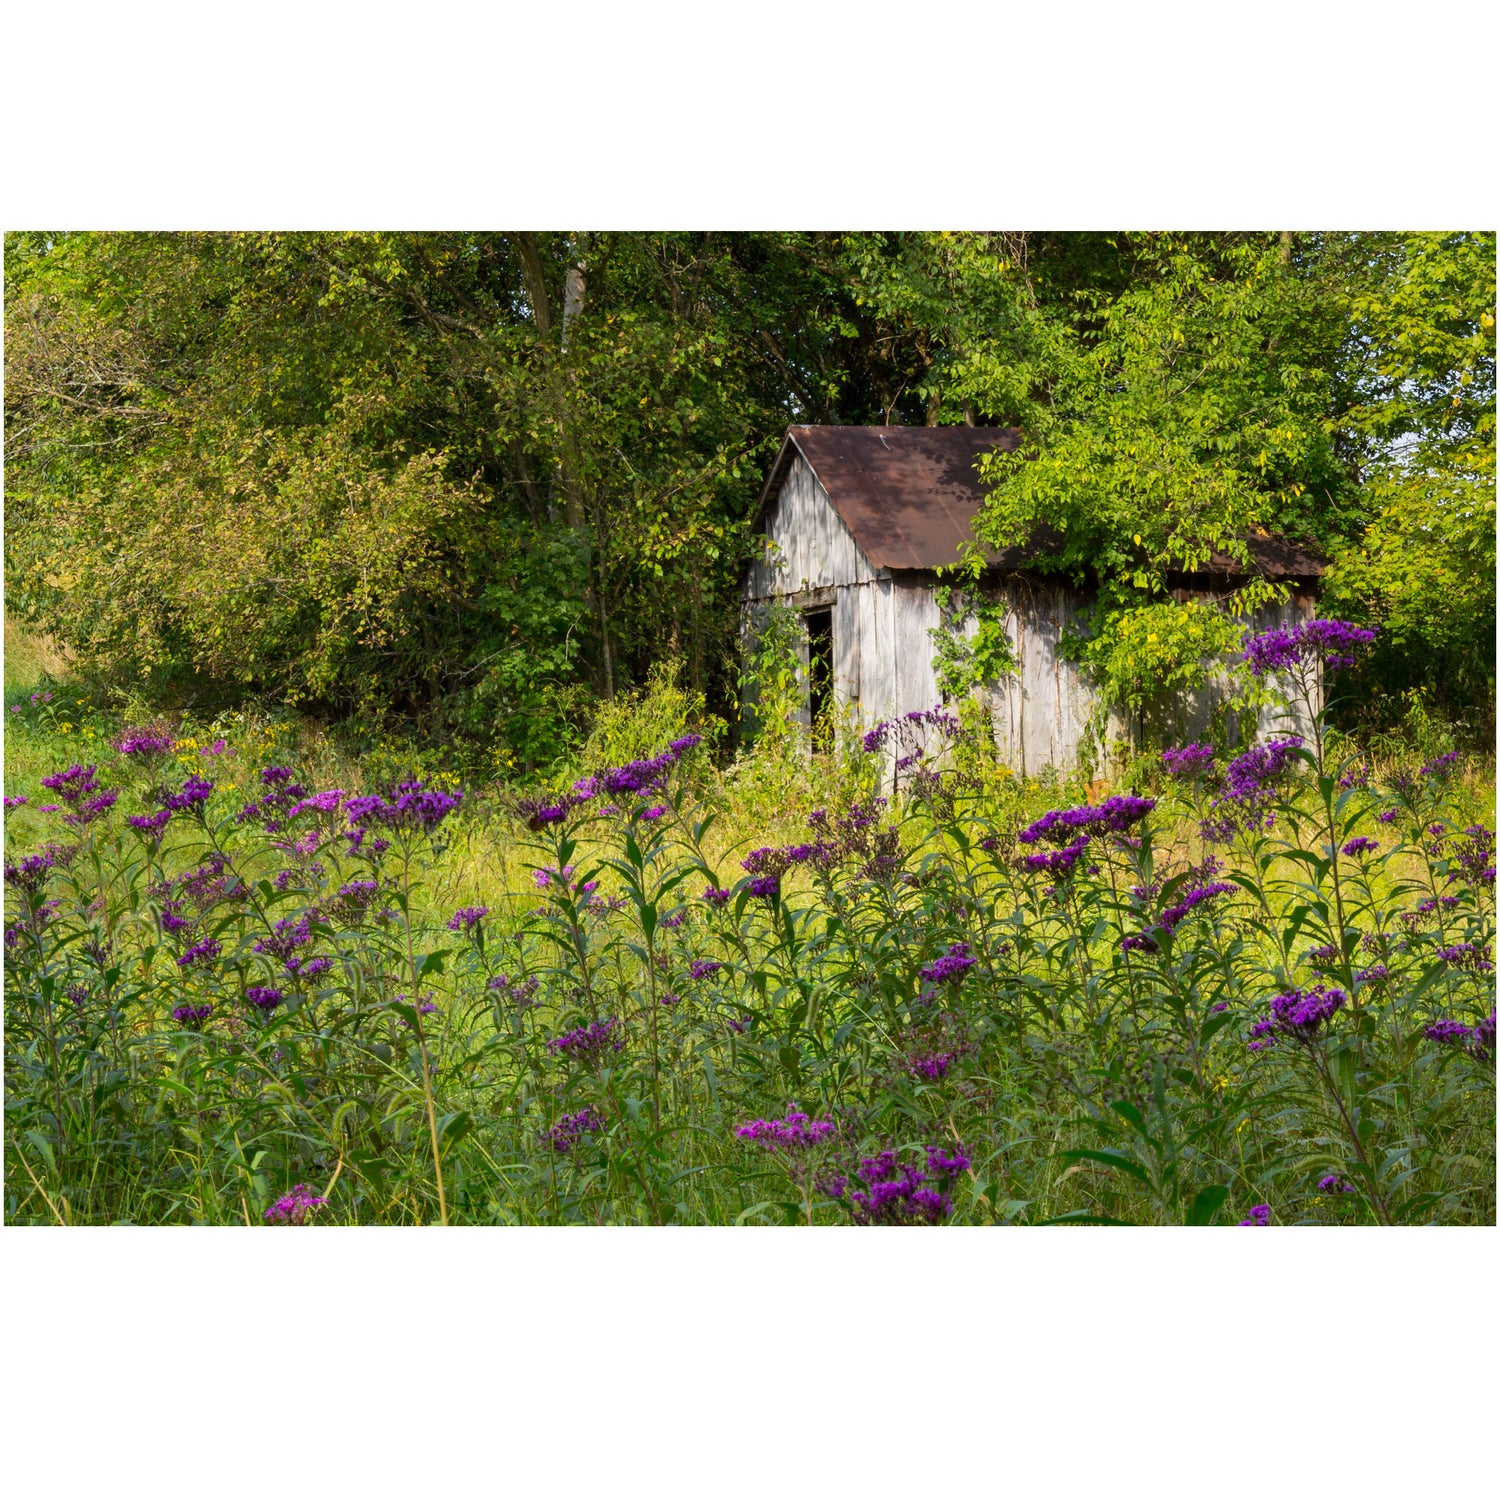 photography print of a garden shed